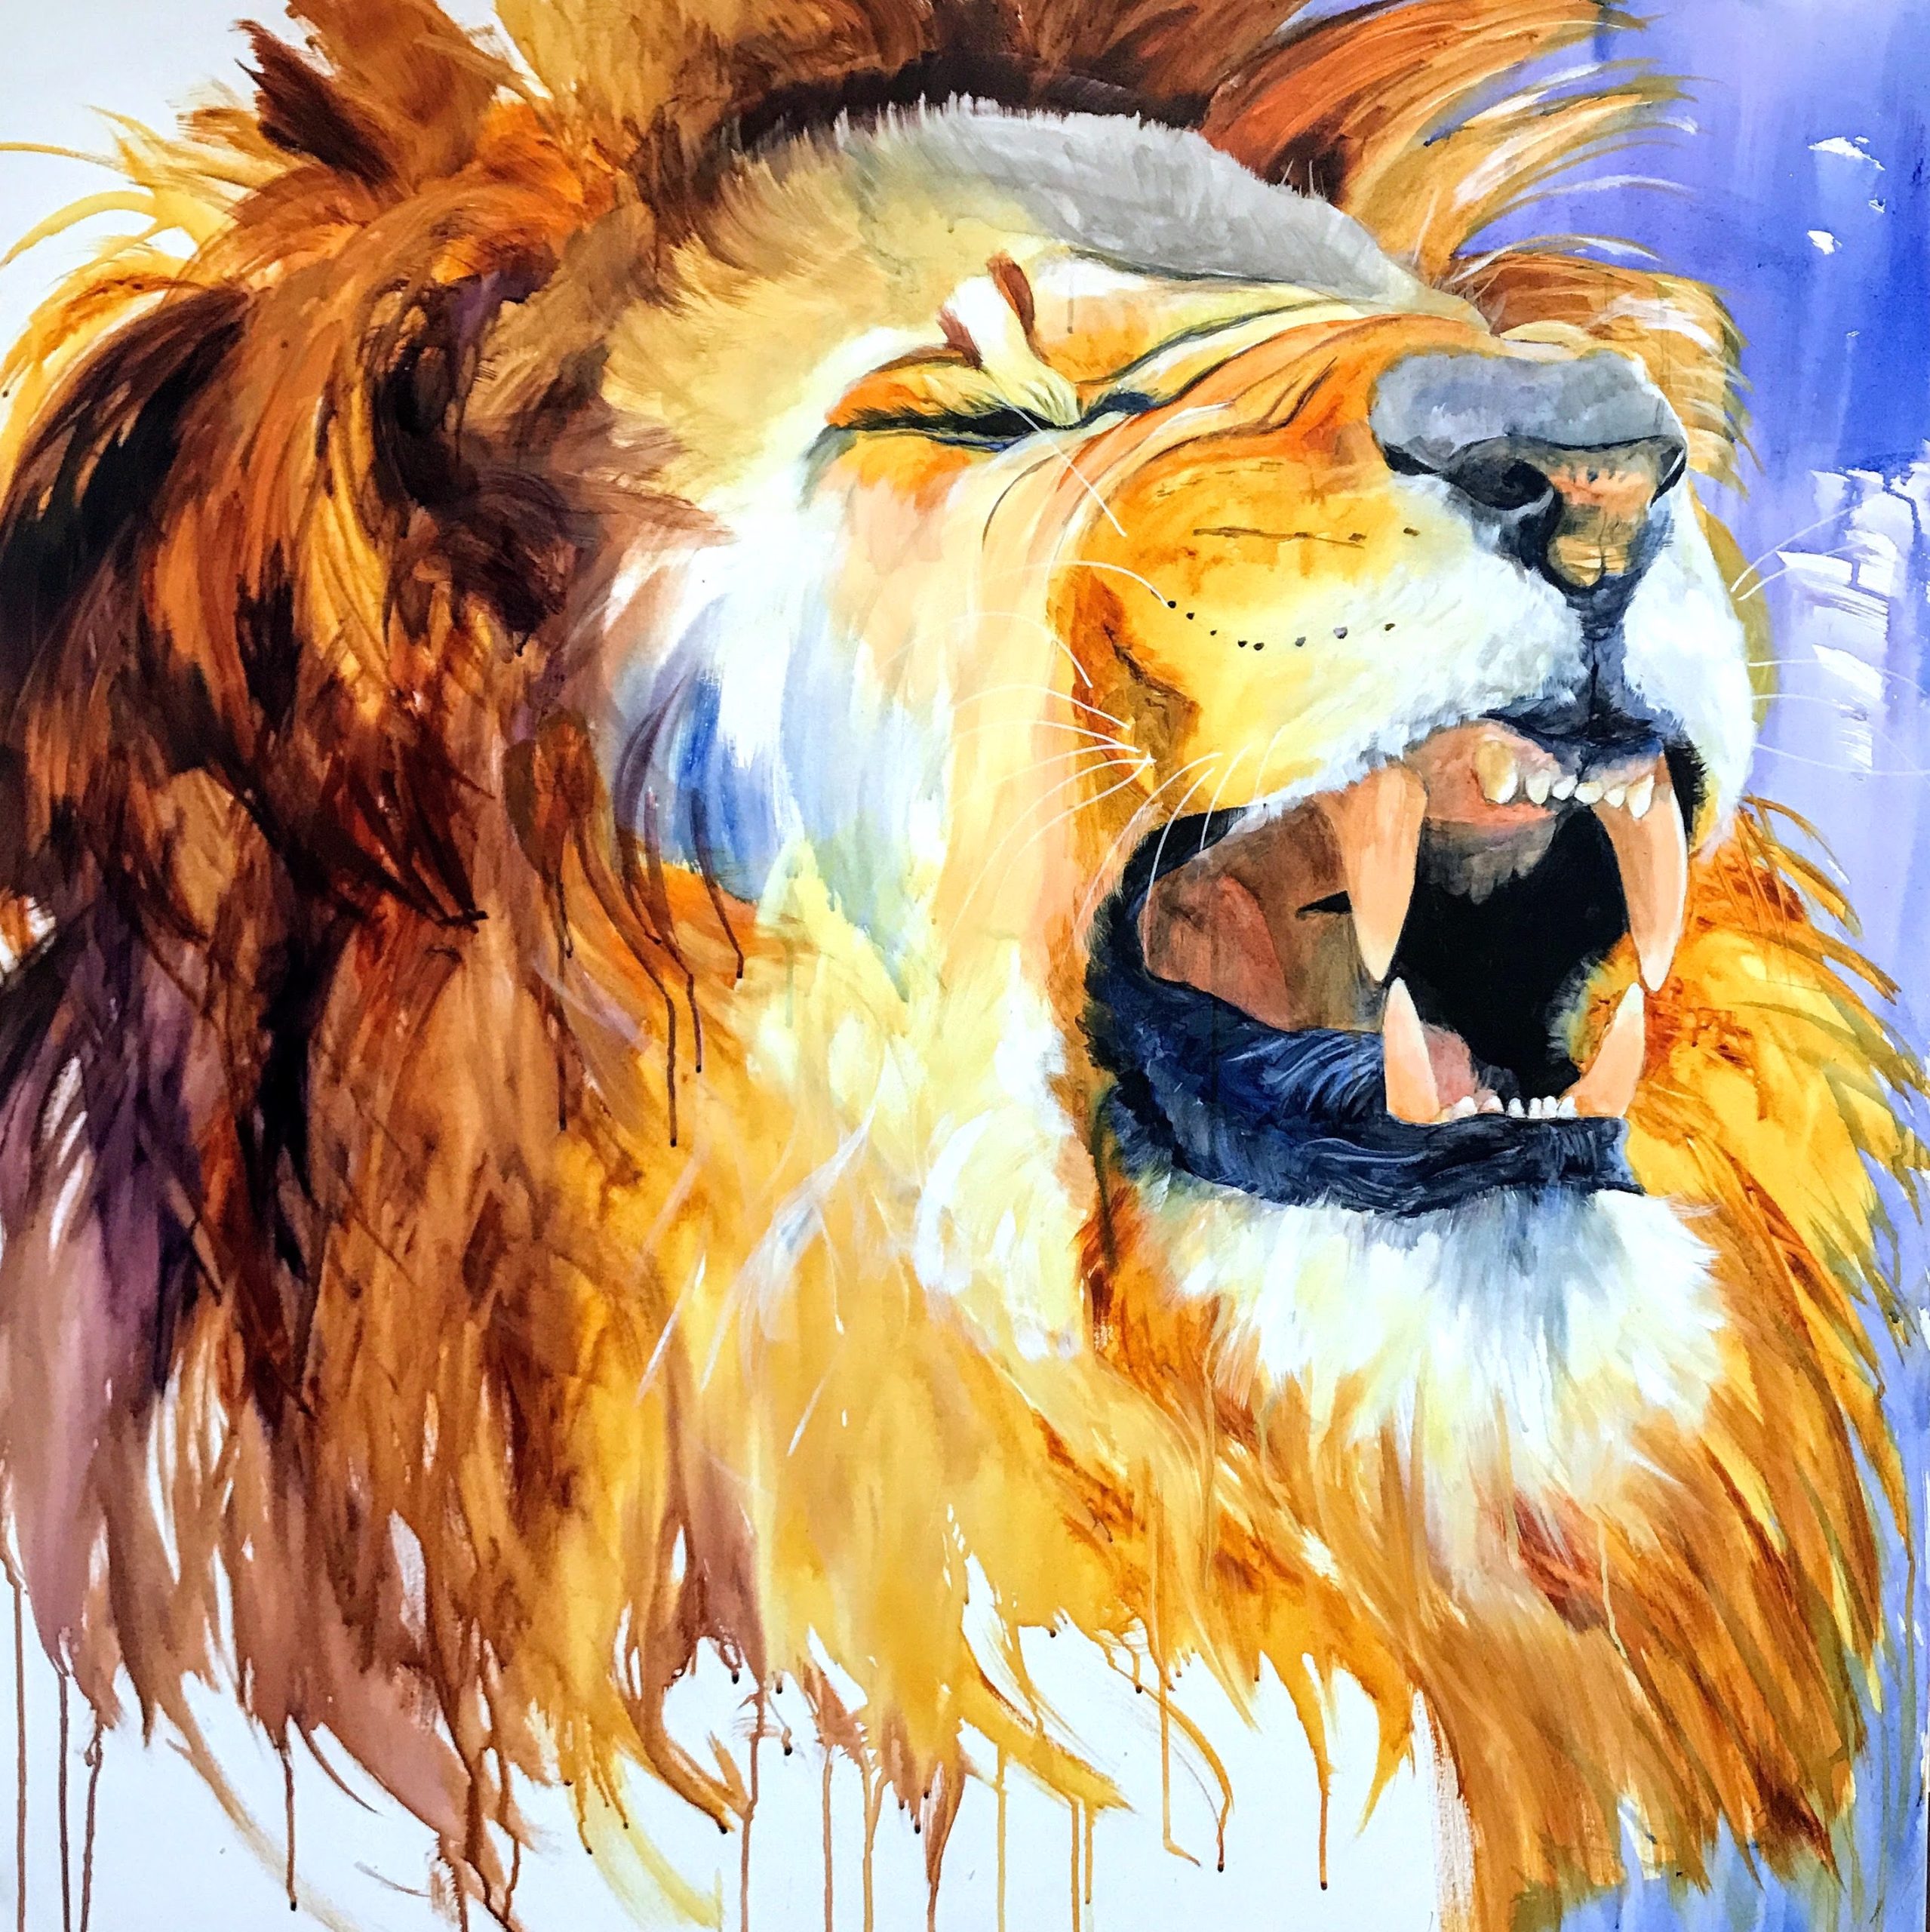 "Let The Lion of Singapore Roar", painted live in Singapore in May, 2023.